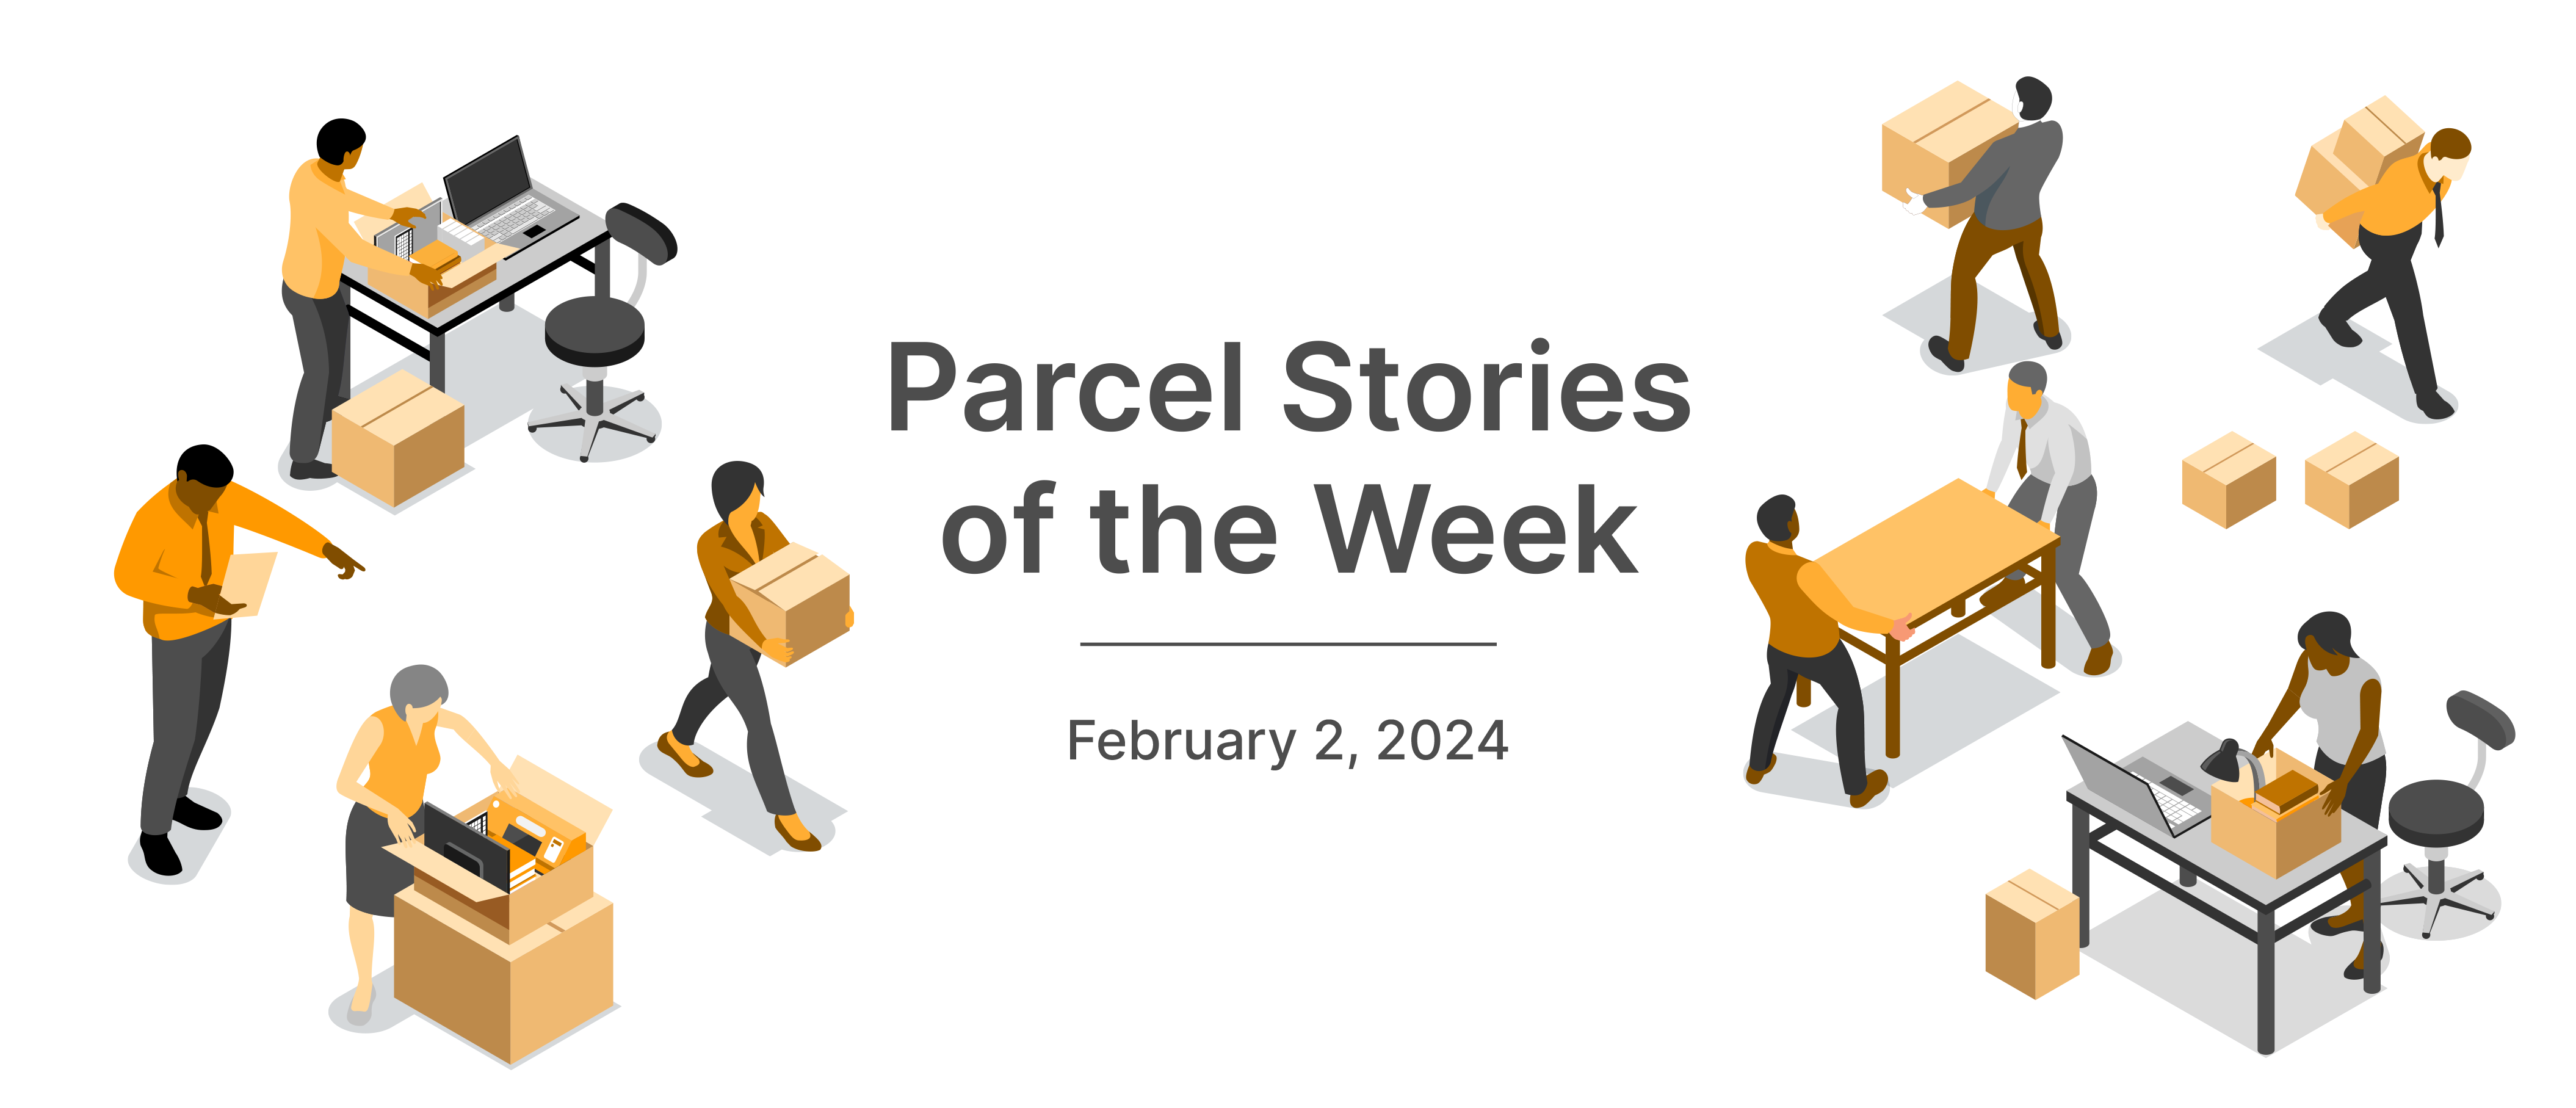 This Week in Parcel: February 2, 2024